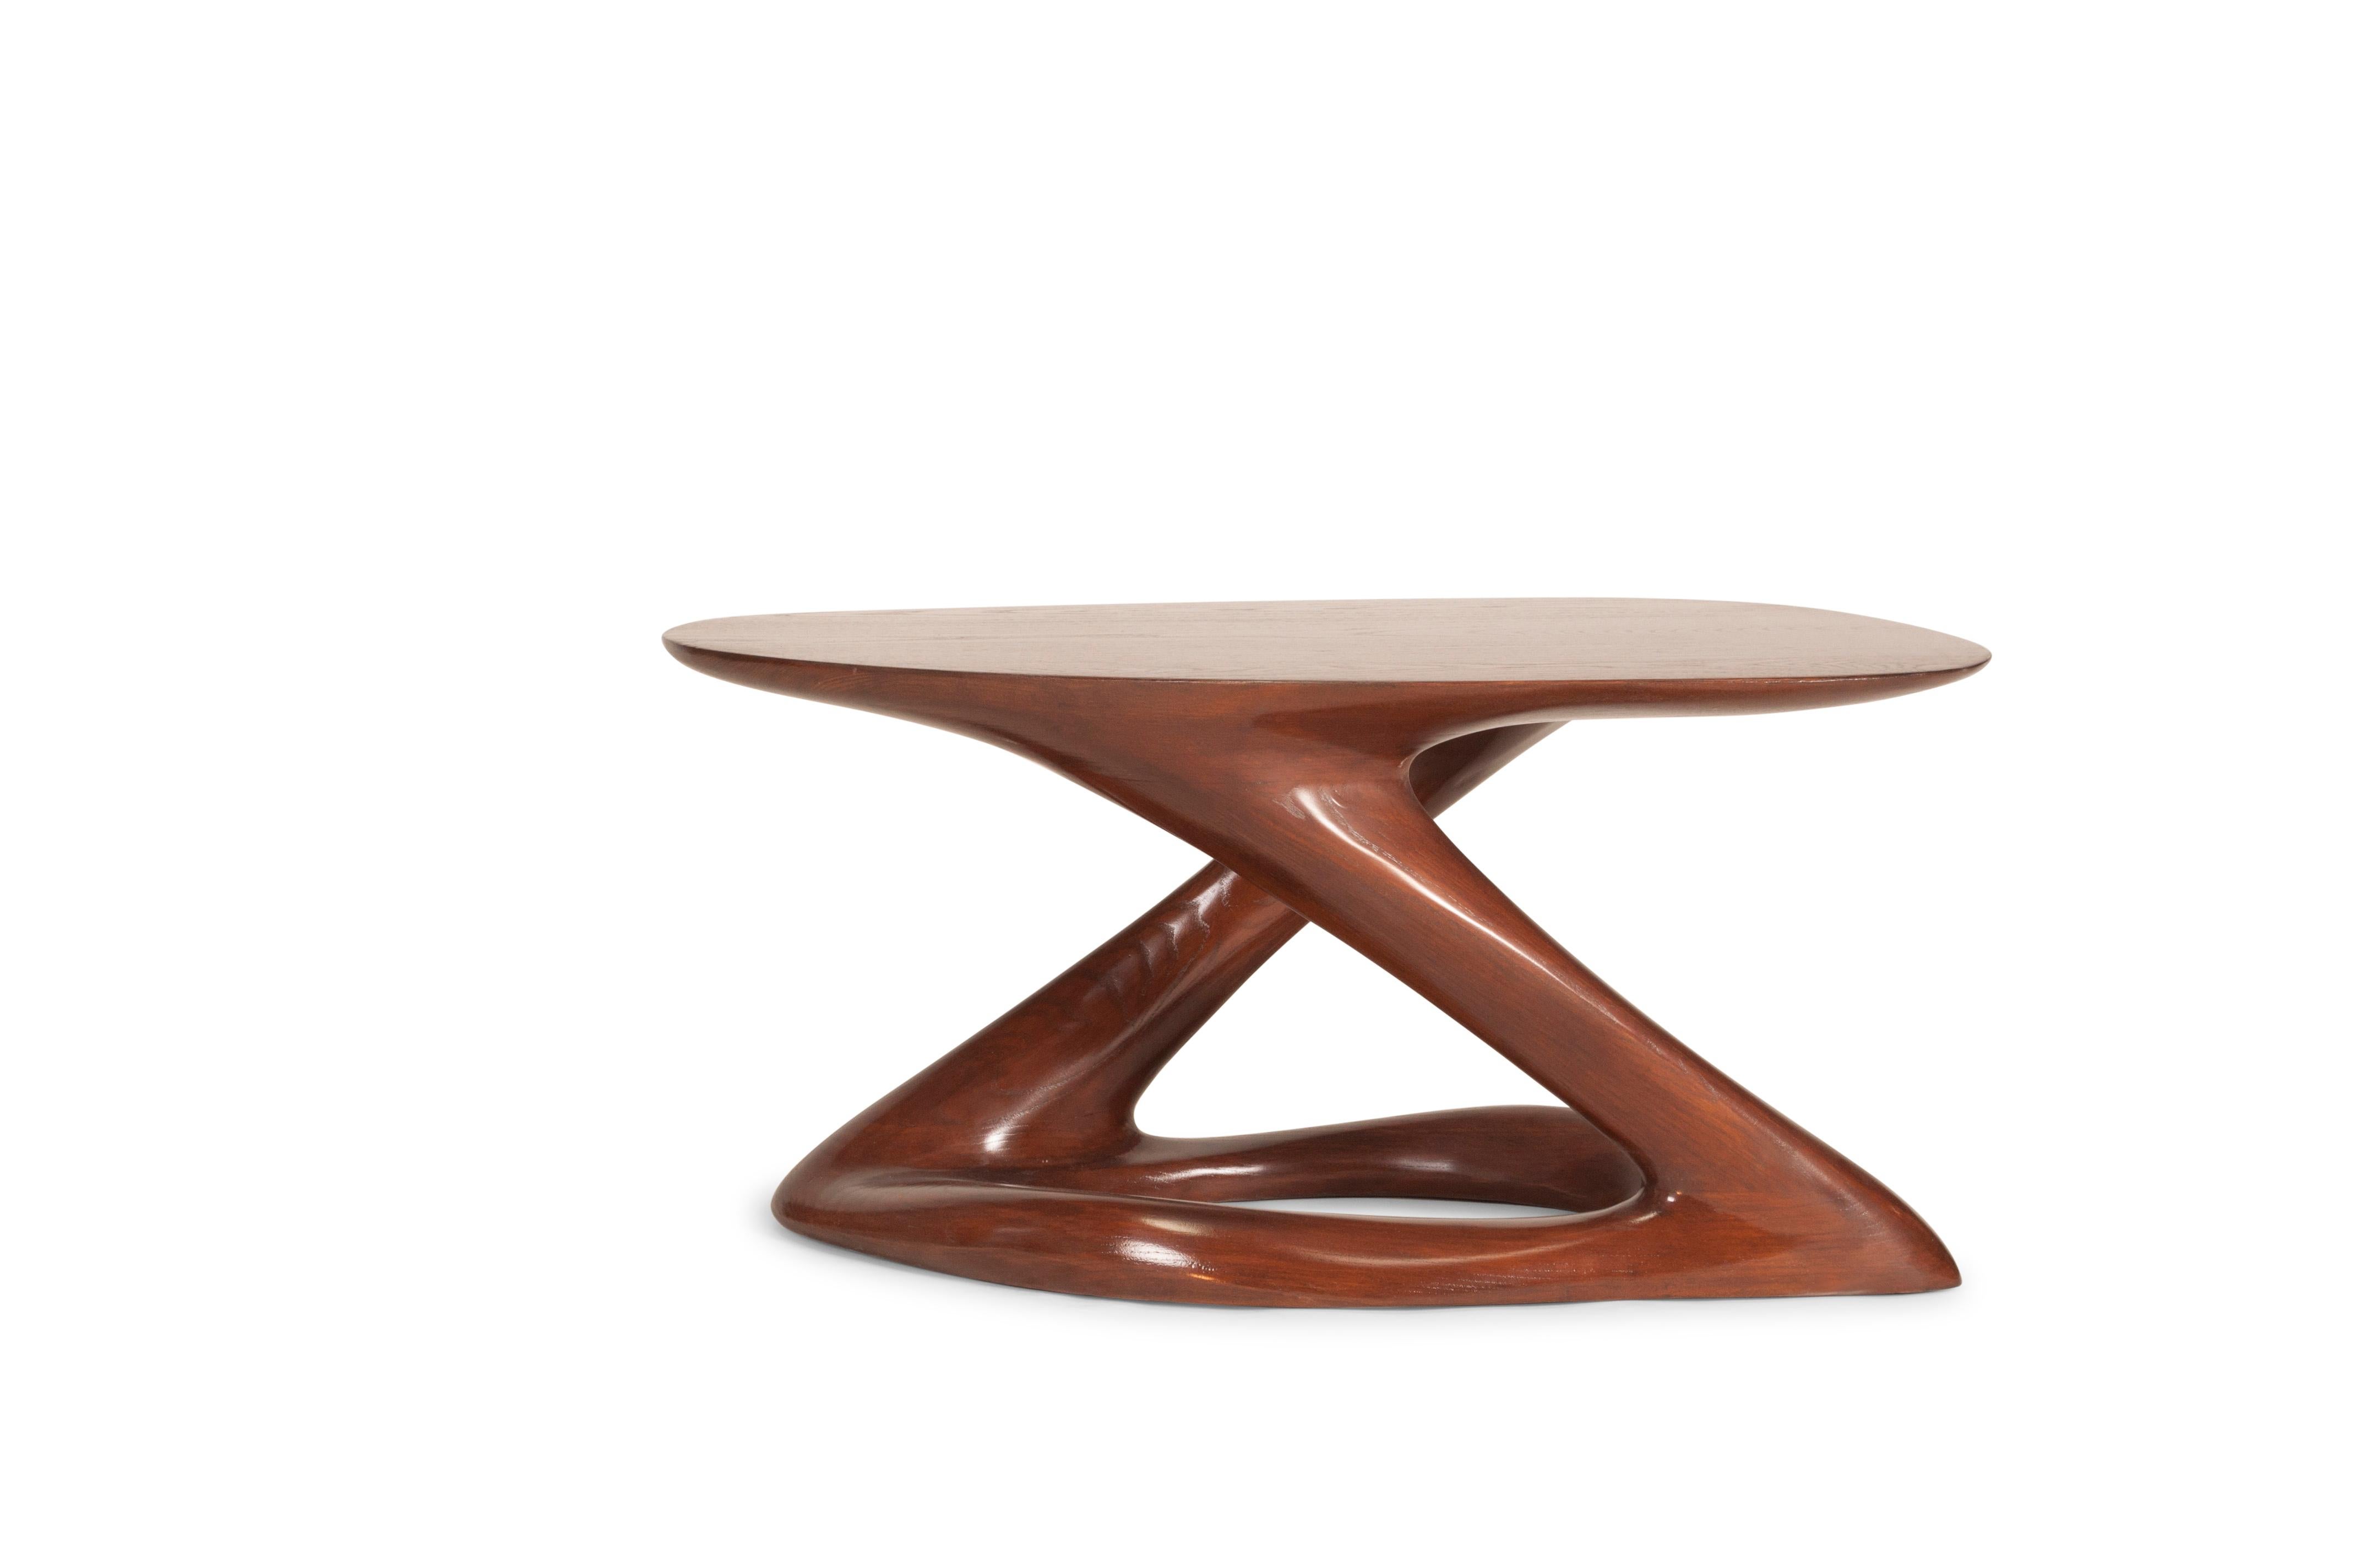 Amorph Plie Modern Coffee Table, Walnut Stain on Ash Wood In New Condition For Sale In Los Angeles, CA